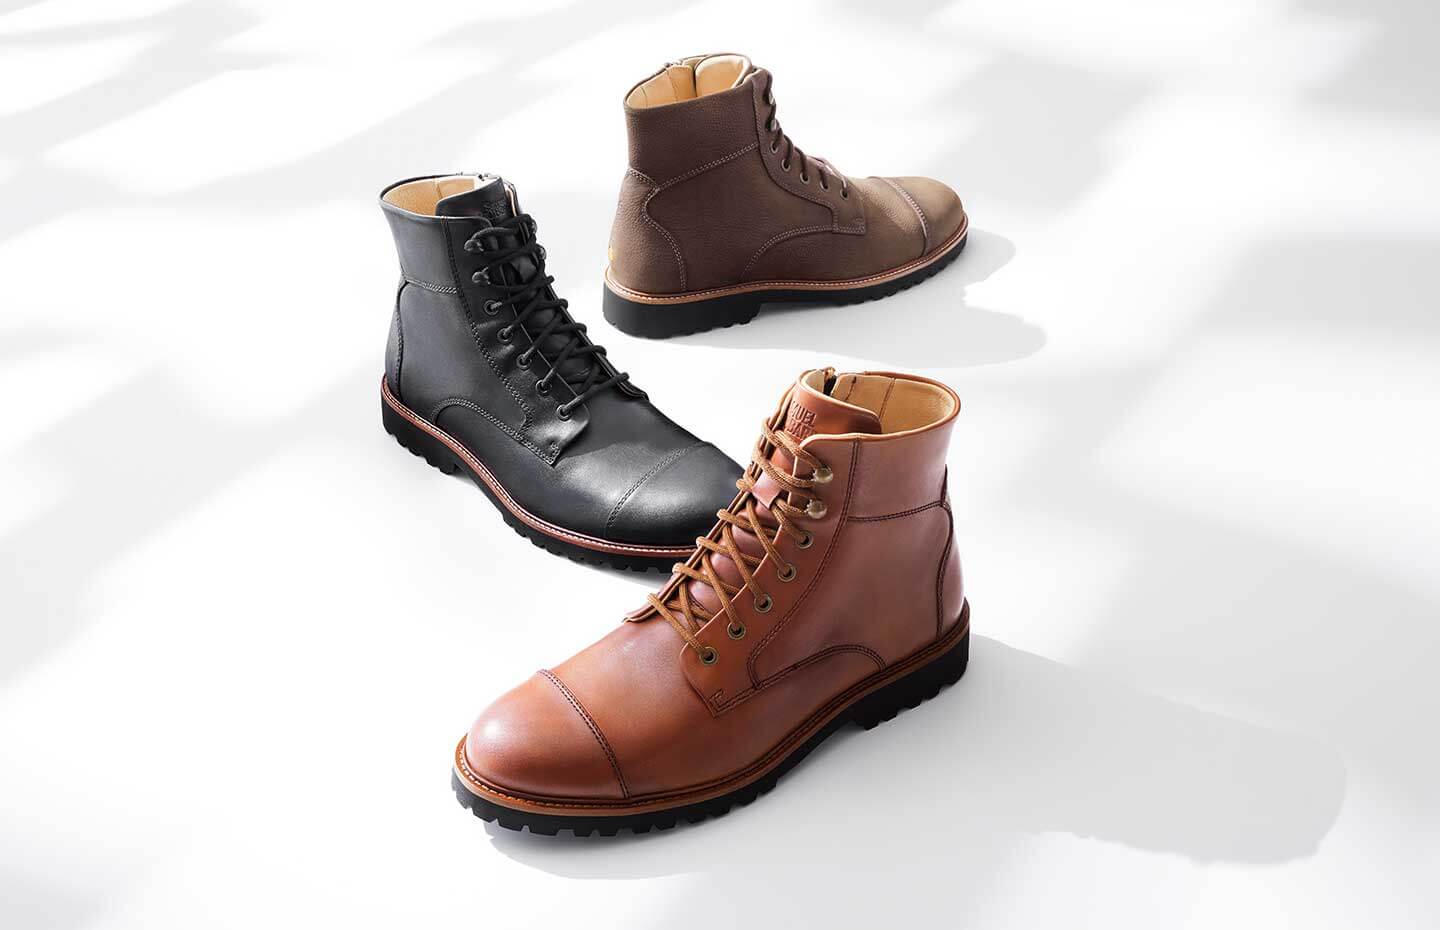 Our Most Versatile Boot